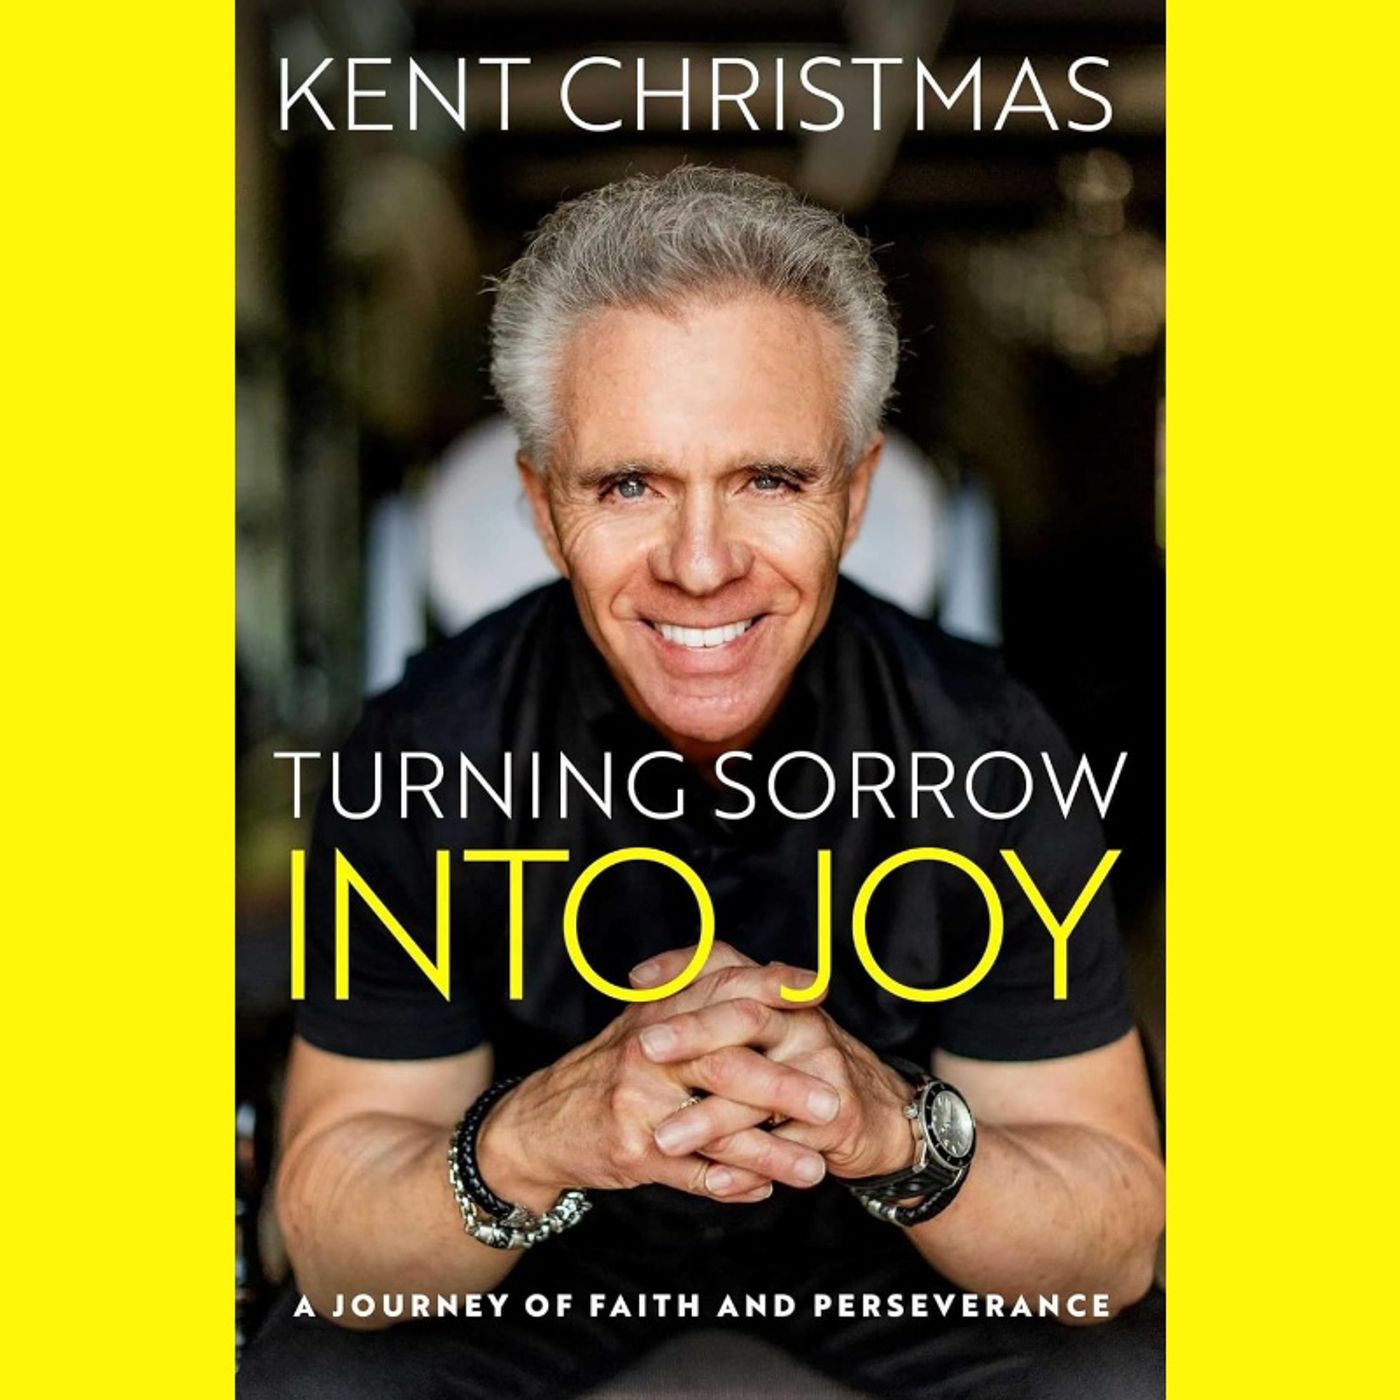 From Darkness to Light: Pastor Kent Christmas' Journey of Faith and Perseverance